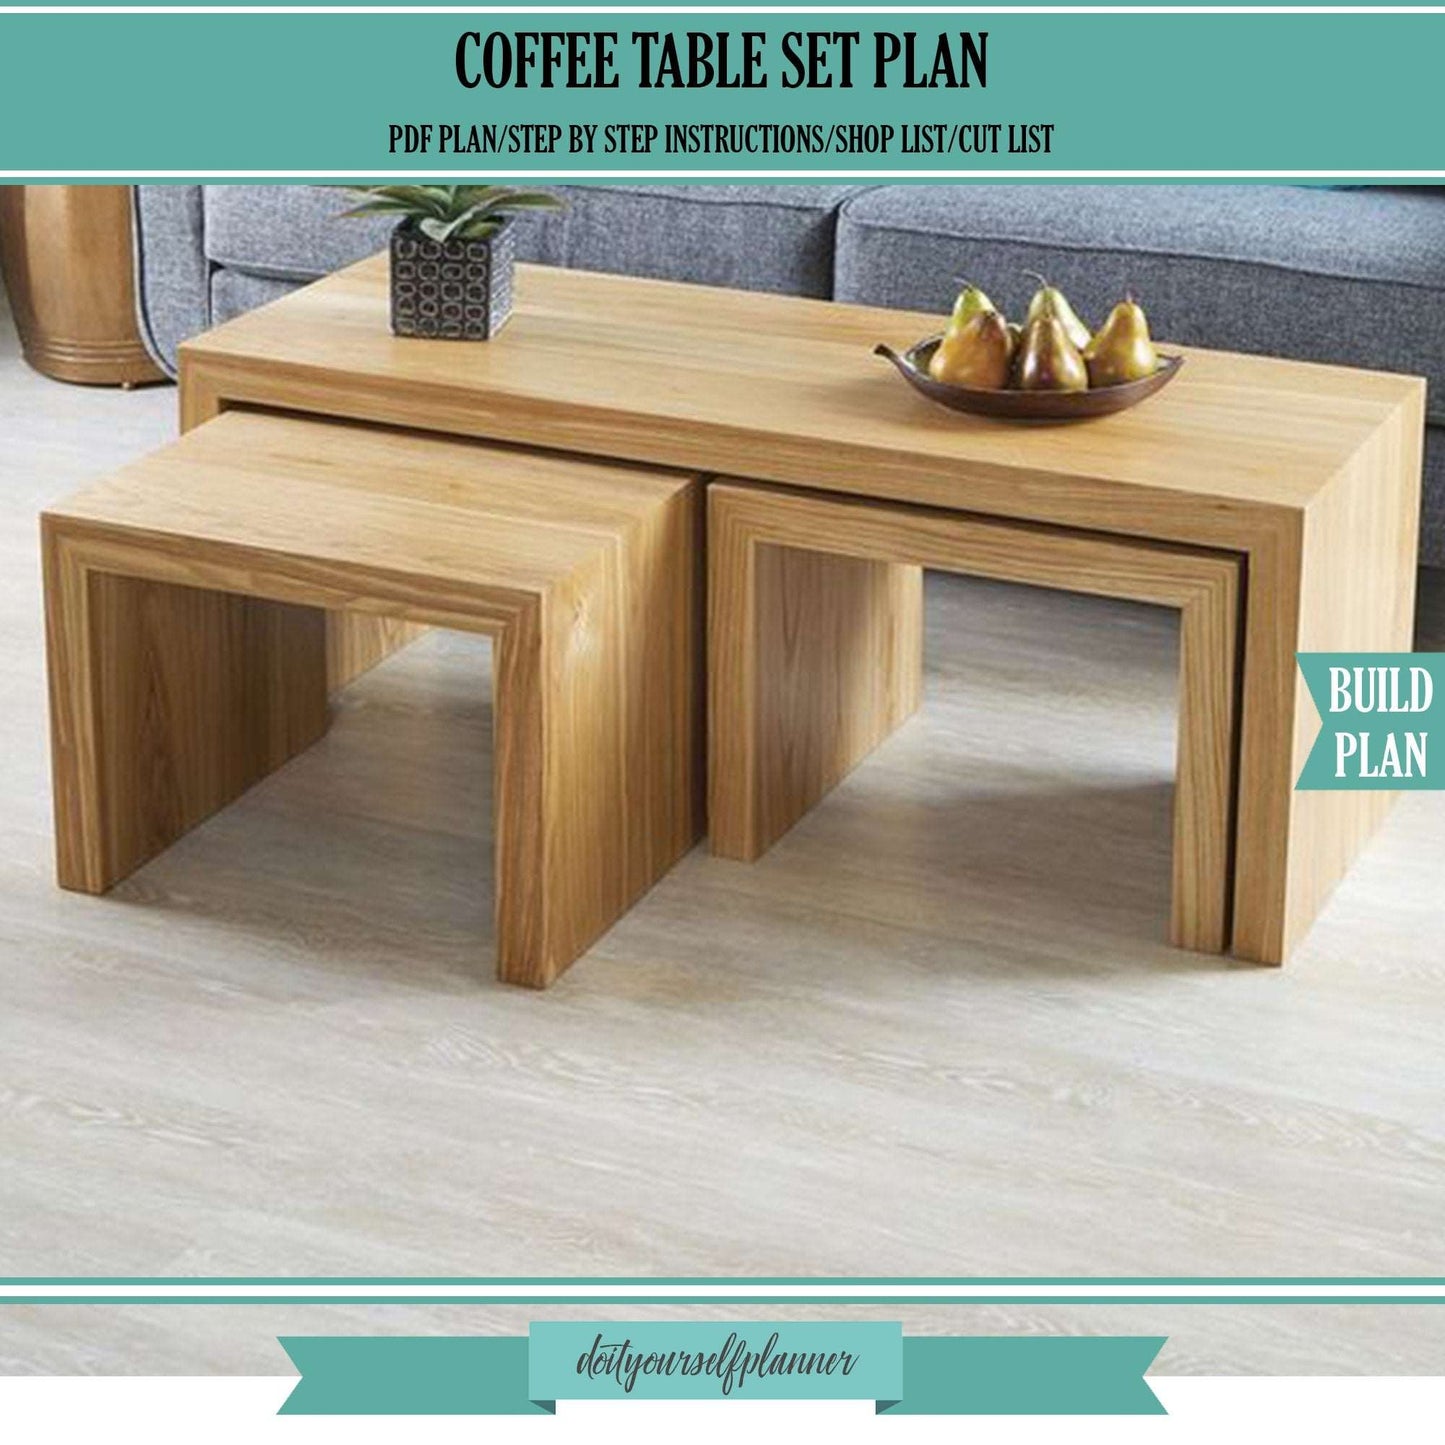 Coffee table plans , nesting table , wooden bench , outdoor bench , indoor bench , nesting coffee table